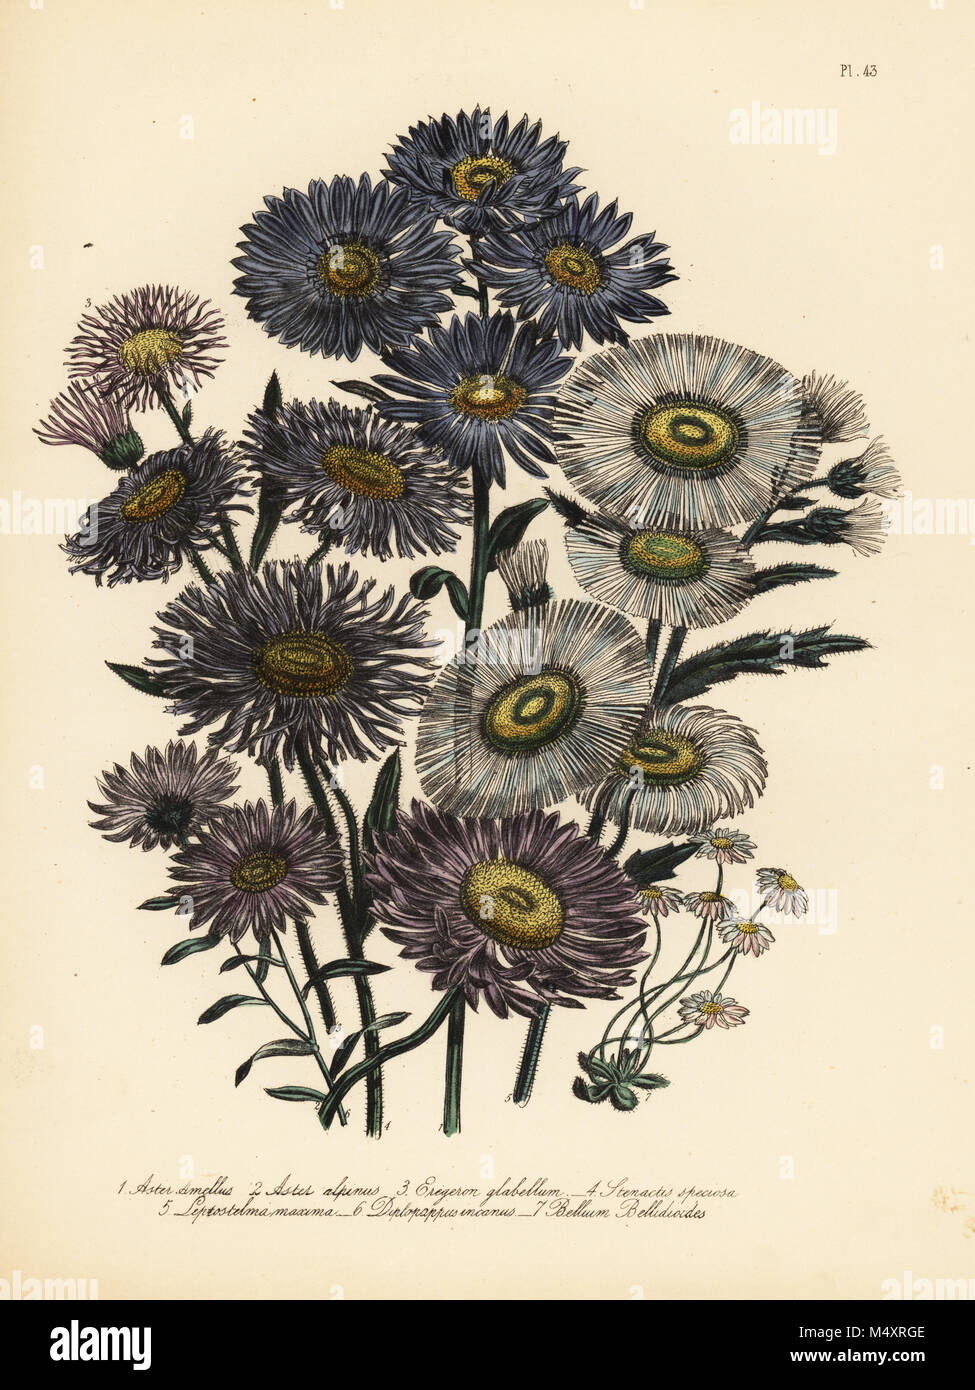 Italian michaelmas daisy, Aster amellus, alpine aster, Aster alpinus, smooth-leaved fleabane, Erigeron glabellum, showy fleabane, Stenactis speciosa, great Mexican daisy, Leptostelma maxima, hoary Californian aster, Diplopappus incarnus, and common lesser daisy, Bellium bellinoides. Handfinished chromolithograph by Henry Noel Humphreys after an illustration by Jane Loudon from Mrs. Jane Loudon's Ladies Flower Garden of Ornamental Perennials, William S. Orr, London, 1849. Stock Photo